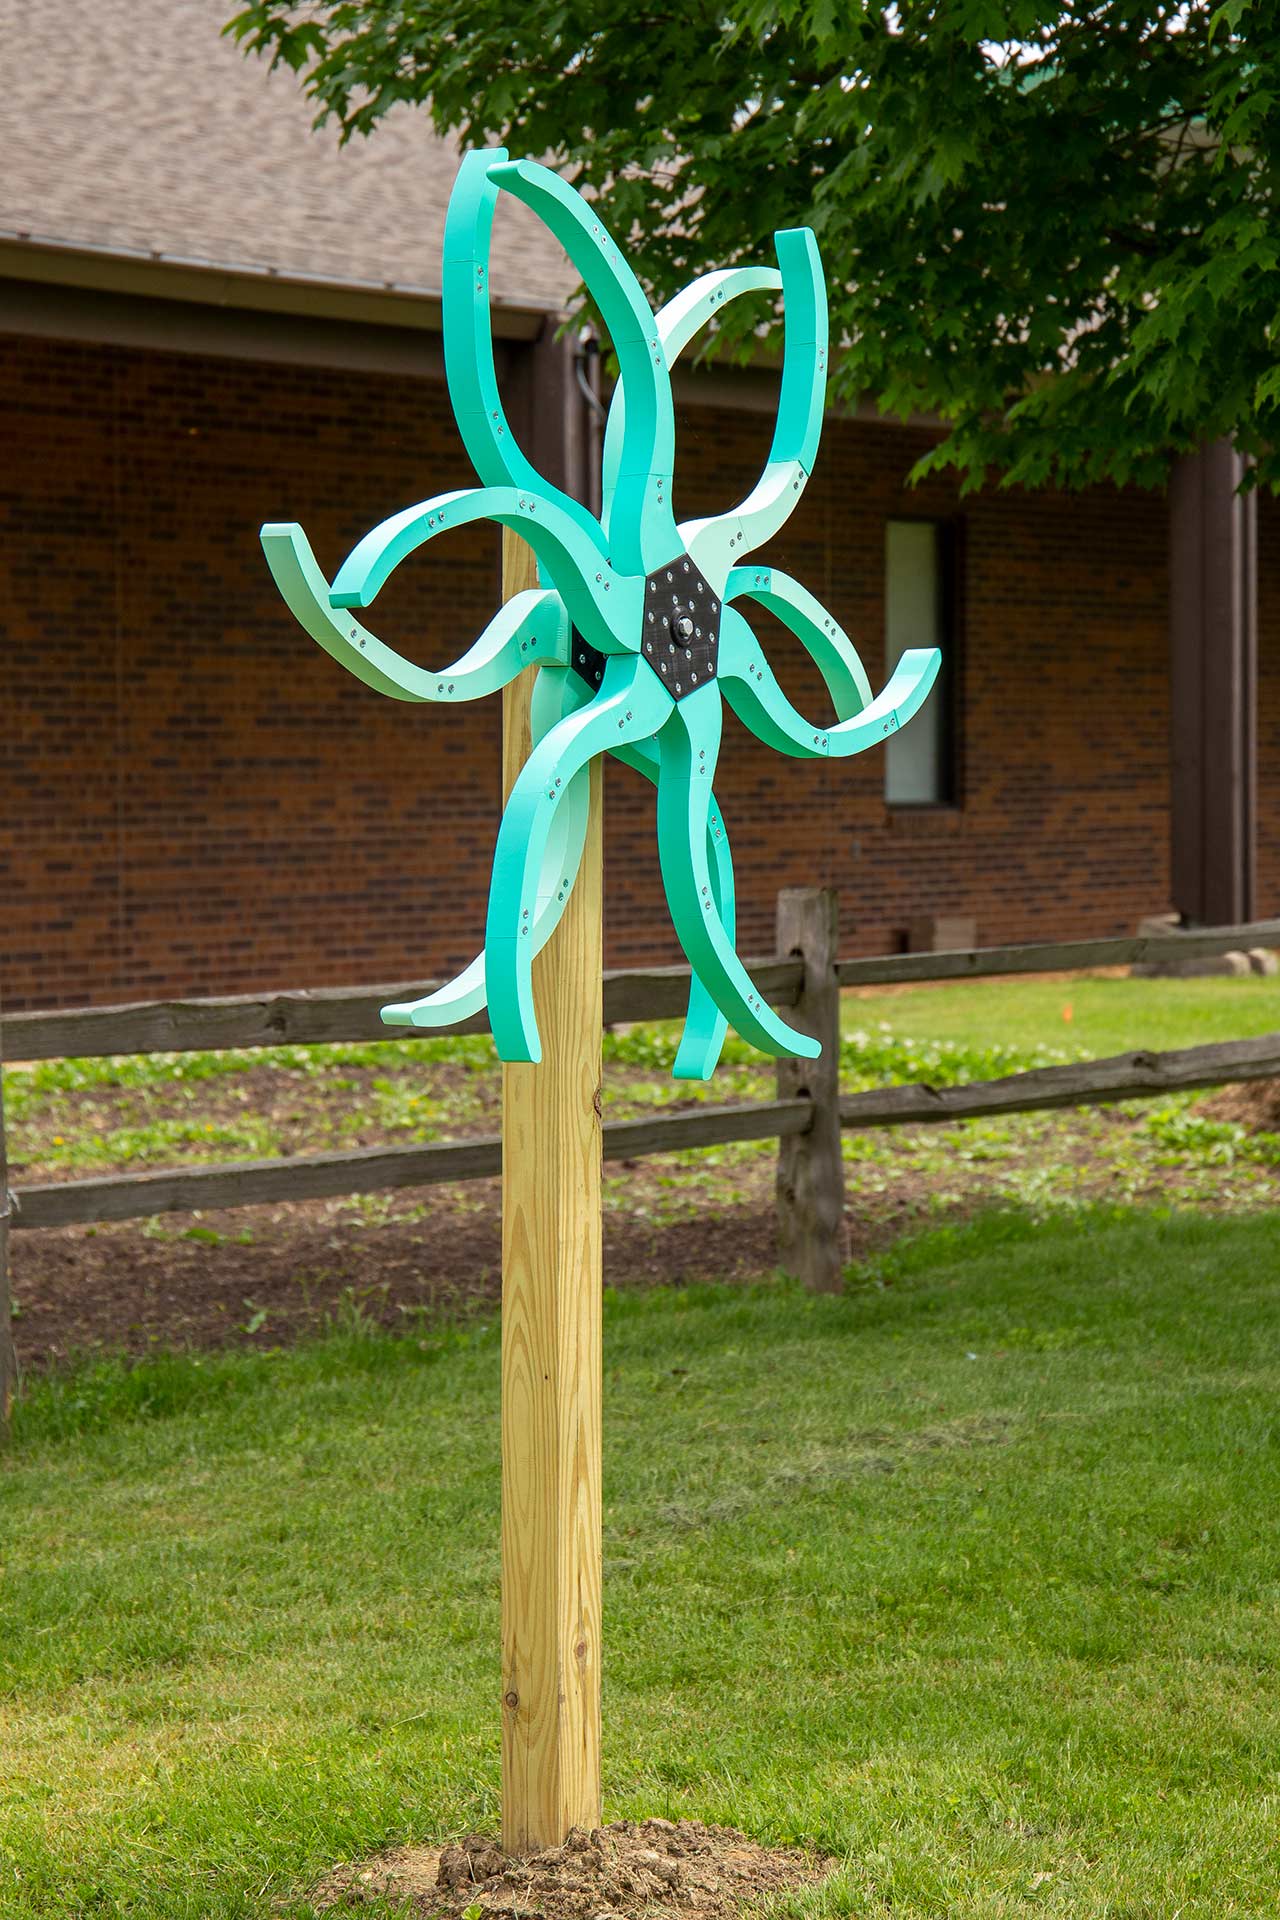 Light-blue tentacles with screws on them that mimic the look of virus nailed on a wooden stick